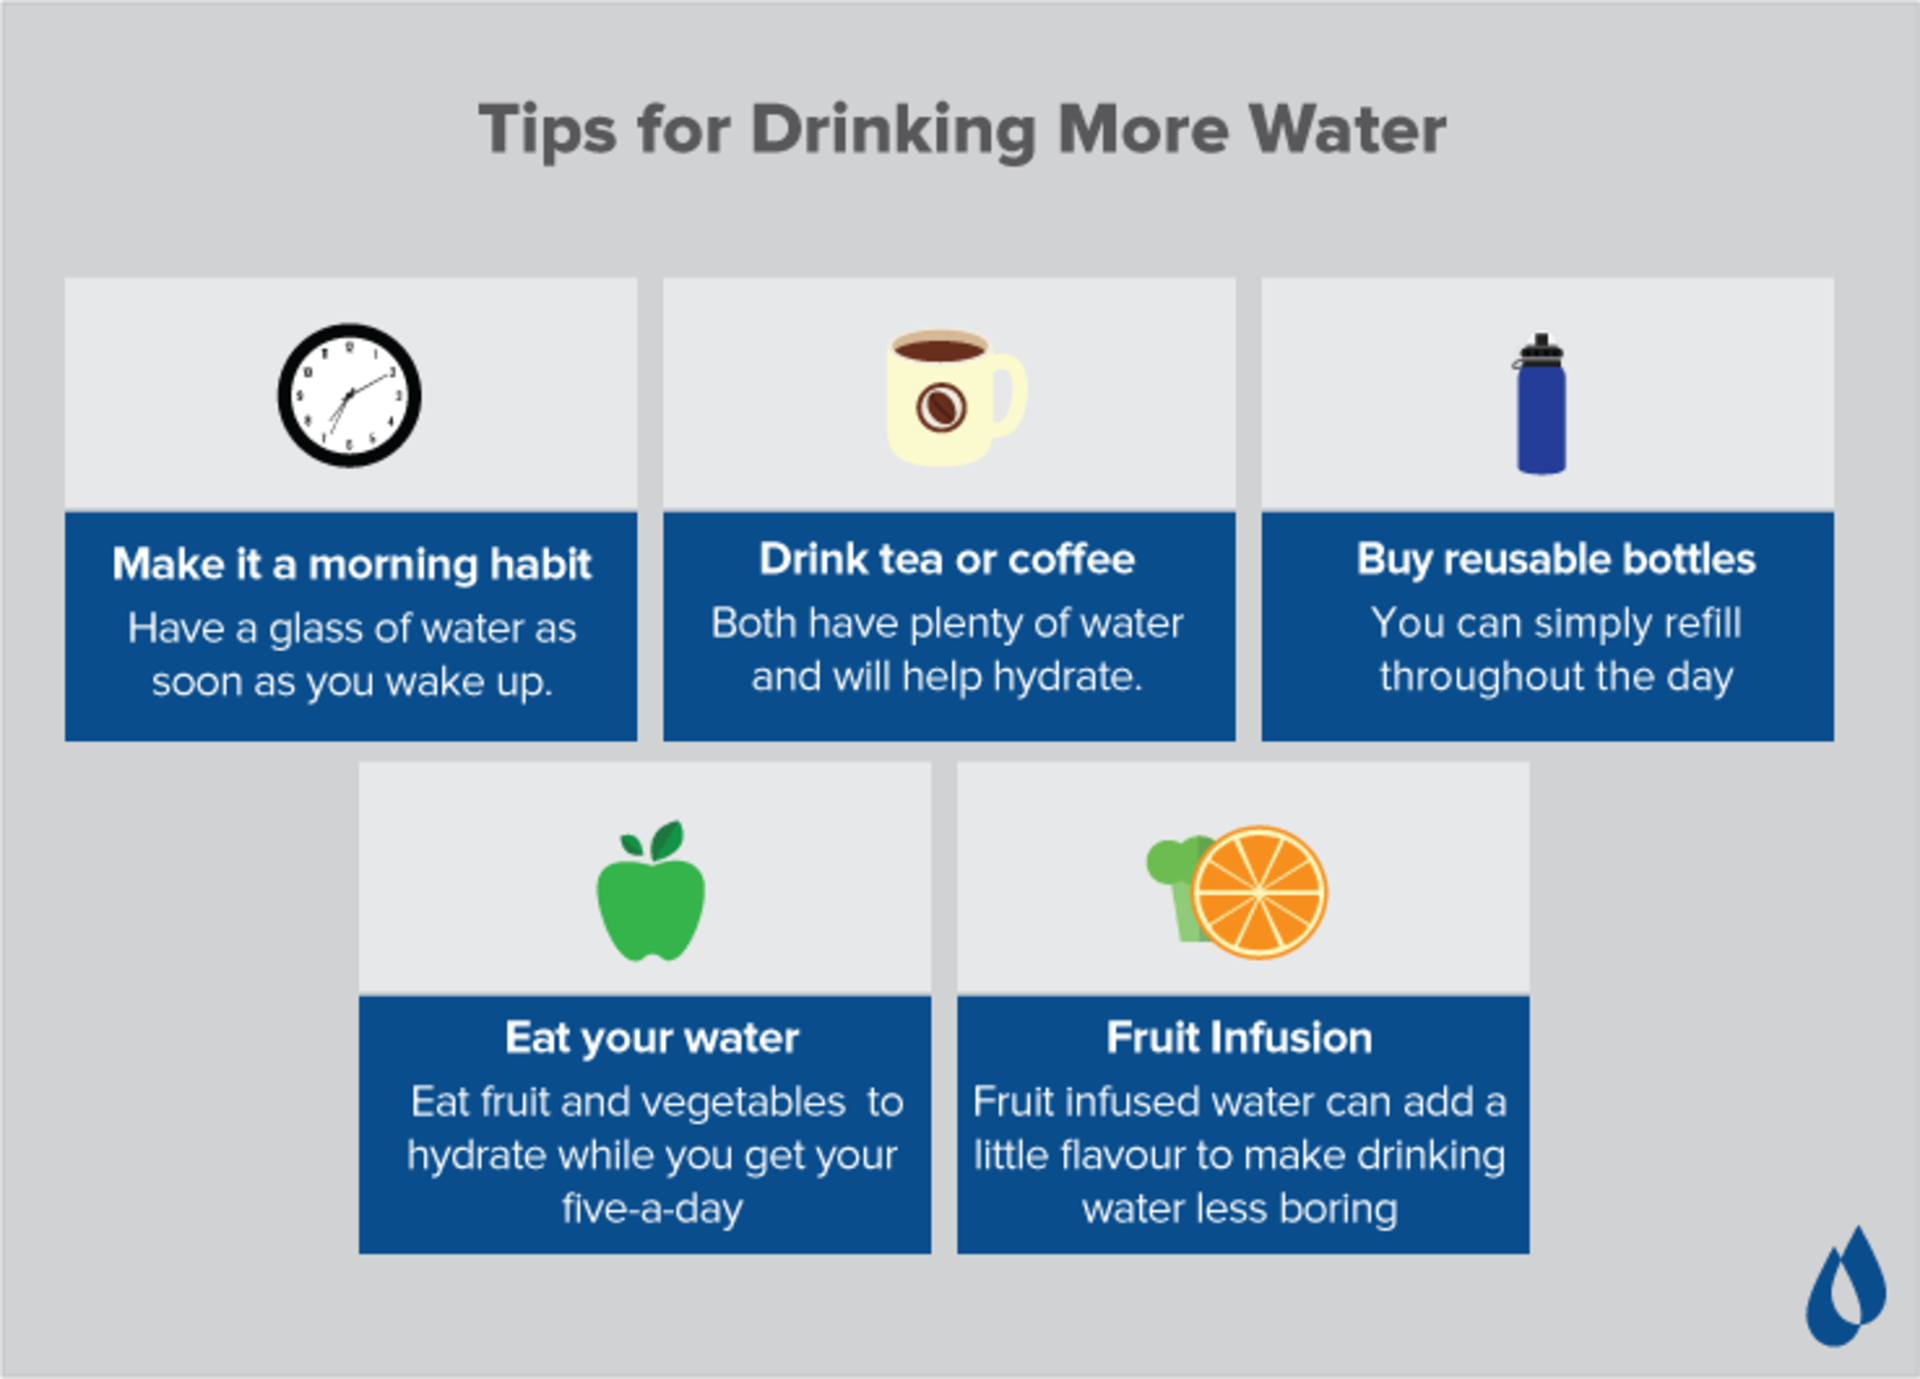 Tips to drink more water